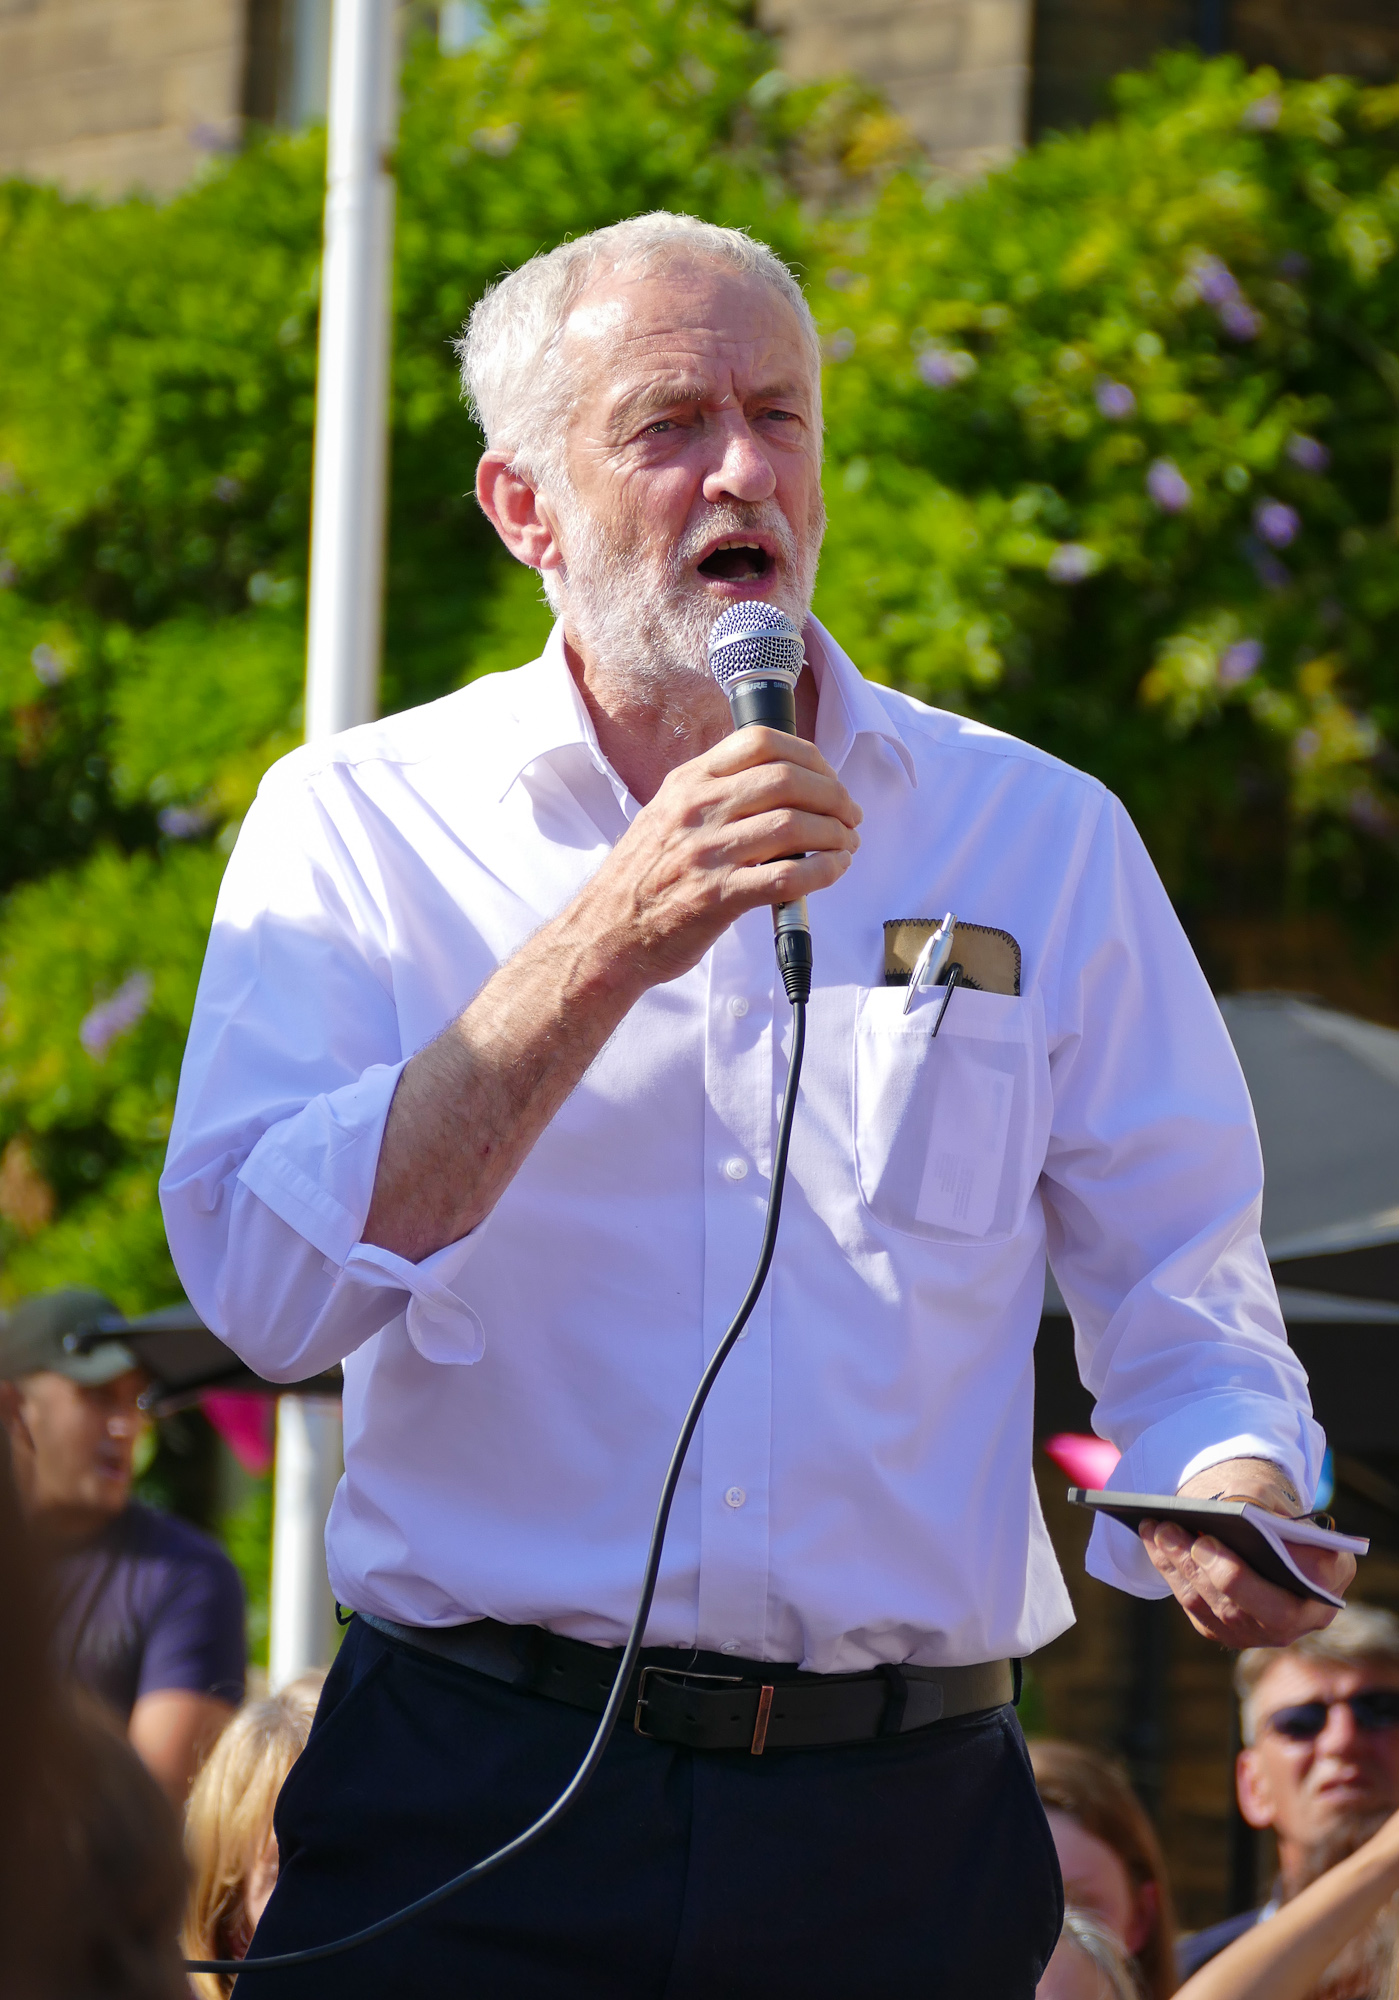 Image of Jeremy Corbyn MP, former leader of the Labour Party